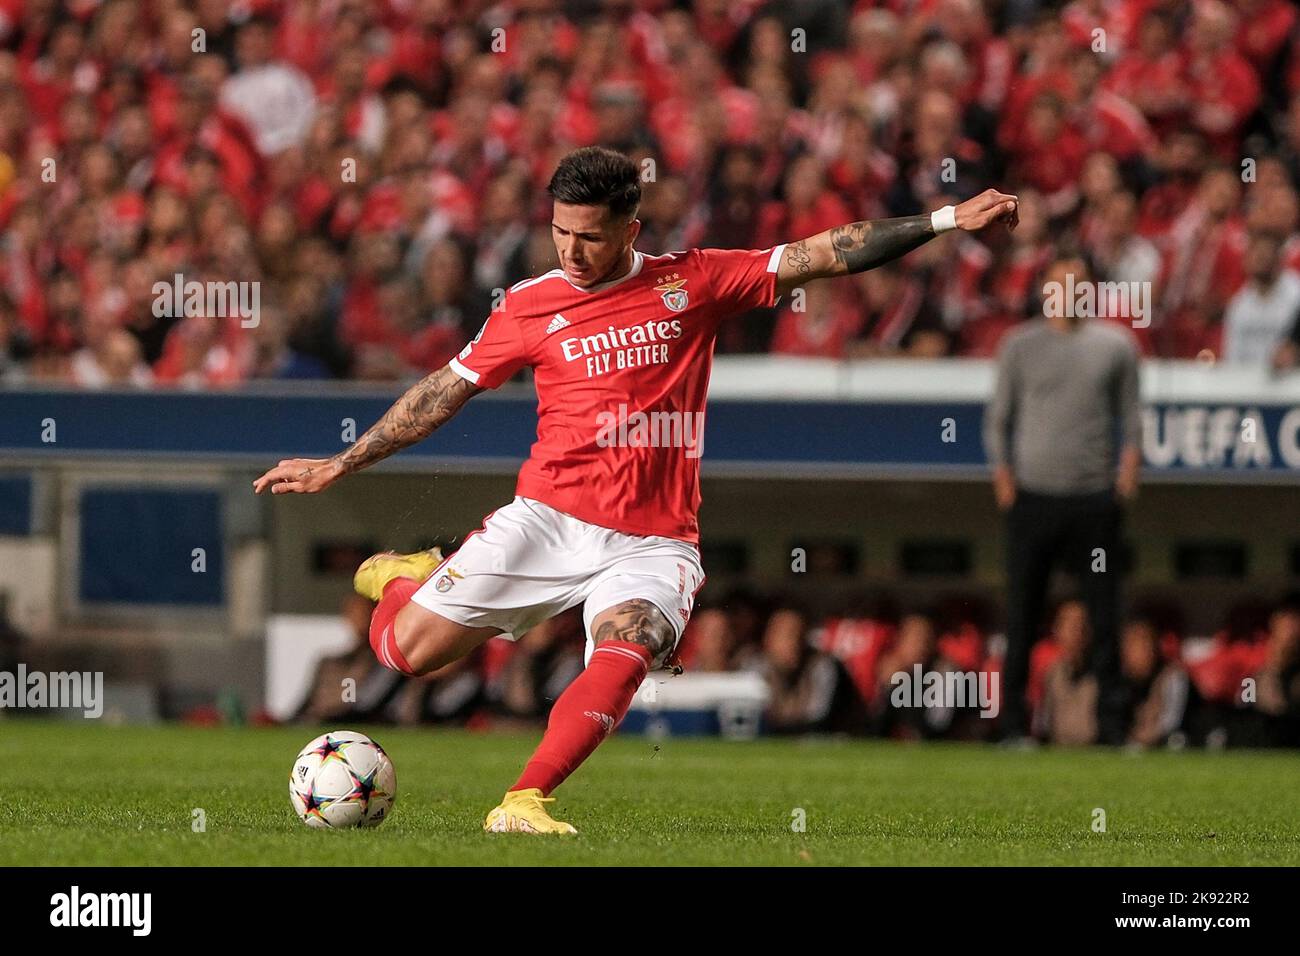 Lisbon, Portugal. 25th Oct, 2022. Enzo Fernandez of Benfica in action during the Champions League Group H football match between Benfica and Juventus FC at estadio da Luz in Lisbon (Portugal), October 25h, 2022. Photo Federico Tardito/Insidefoto Credit: Insidefoto di andrea staccioli/Alamy Live News Stock Photo